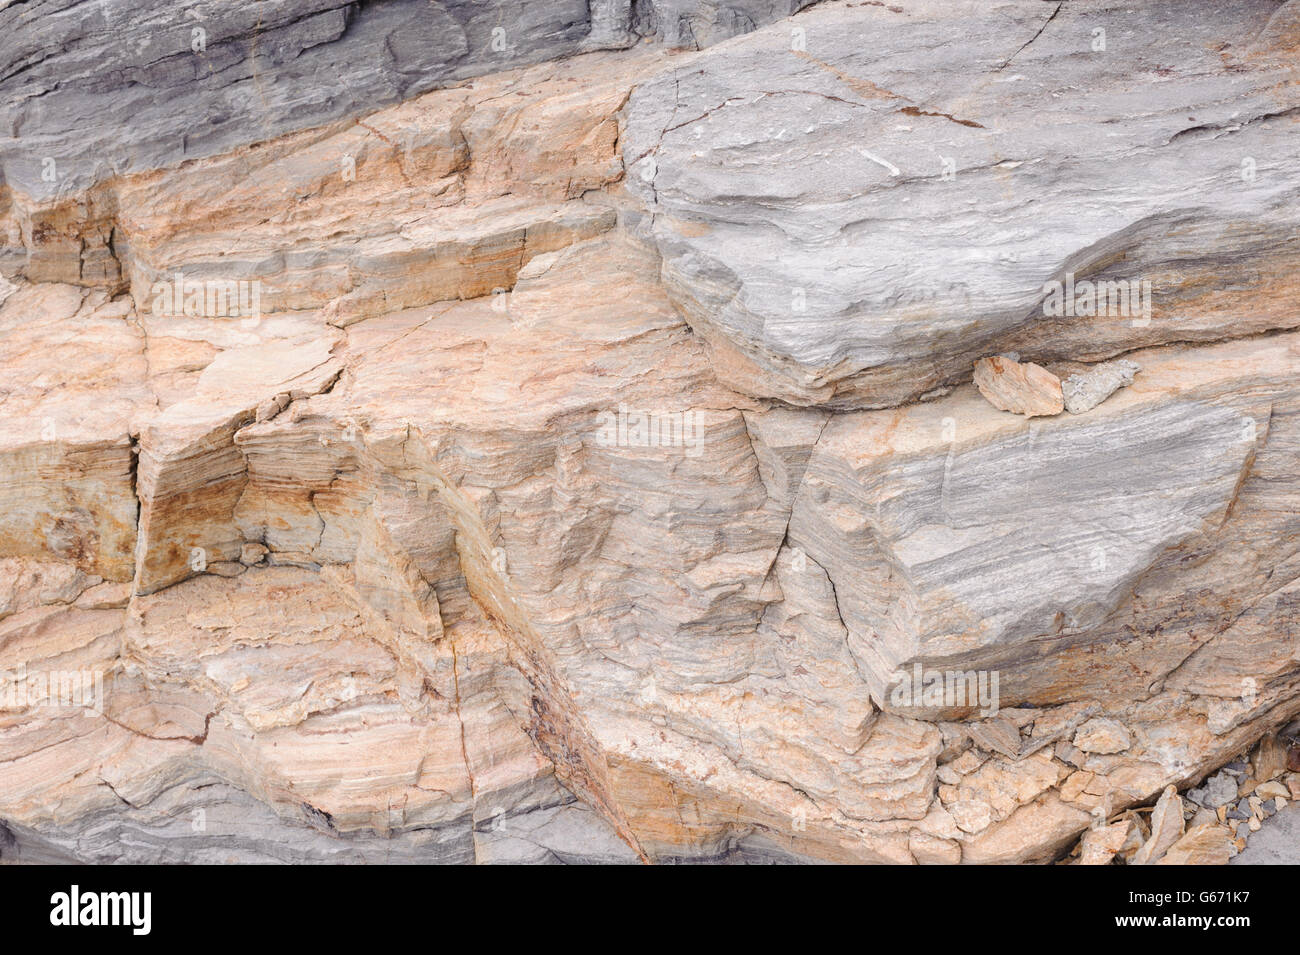 Natural stone sculpture background Stock Photo